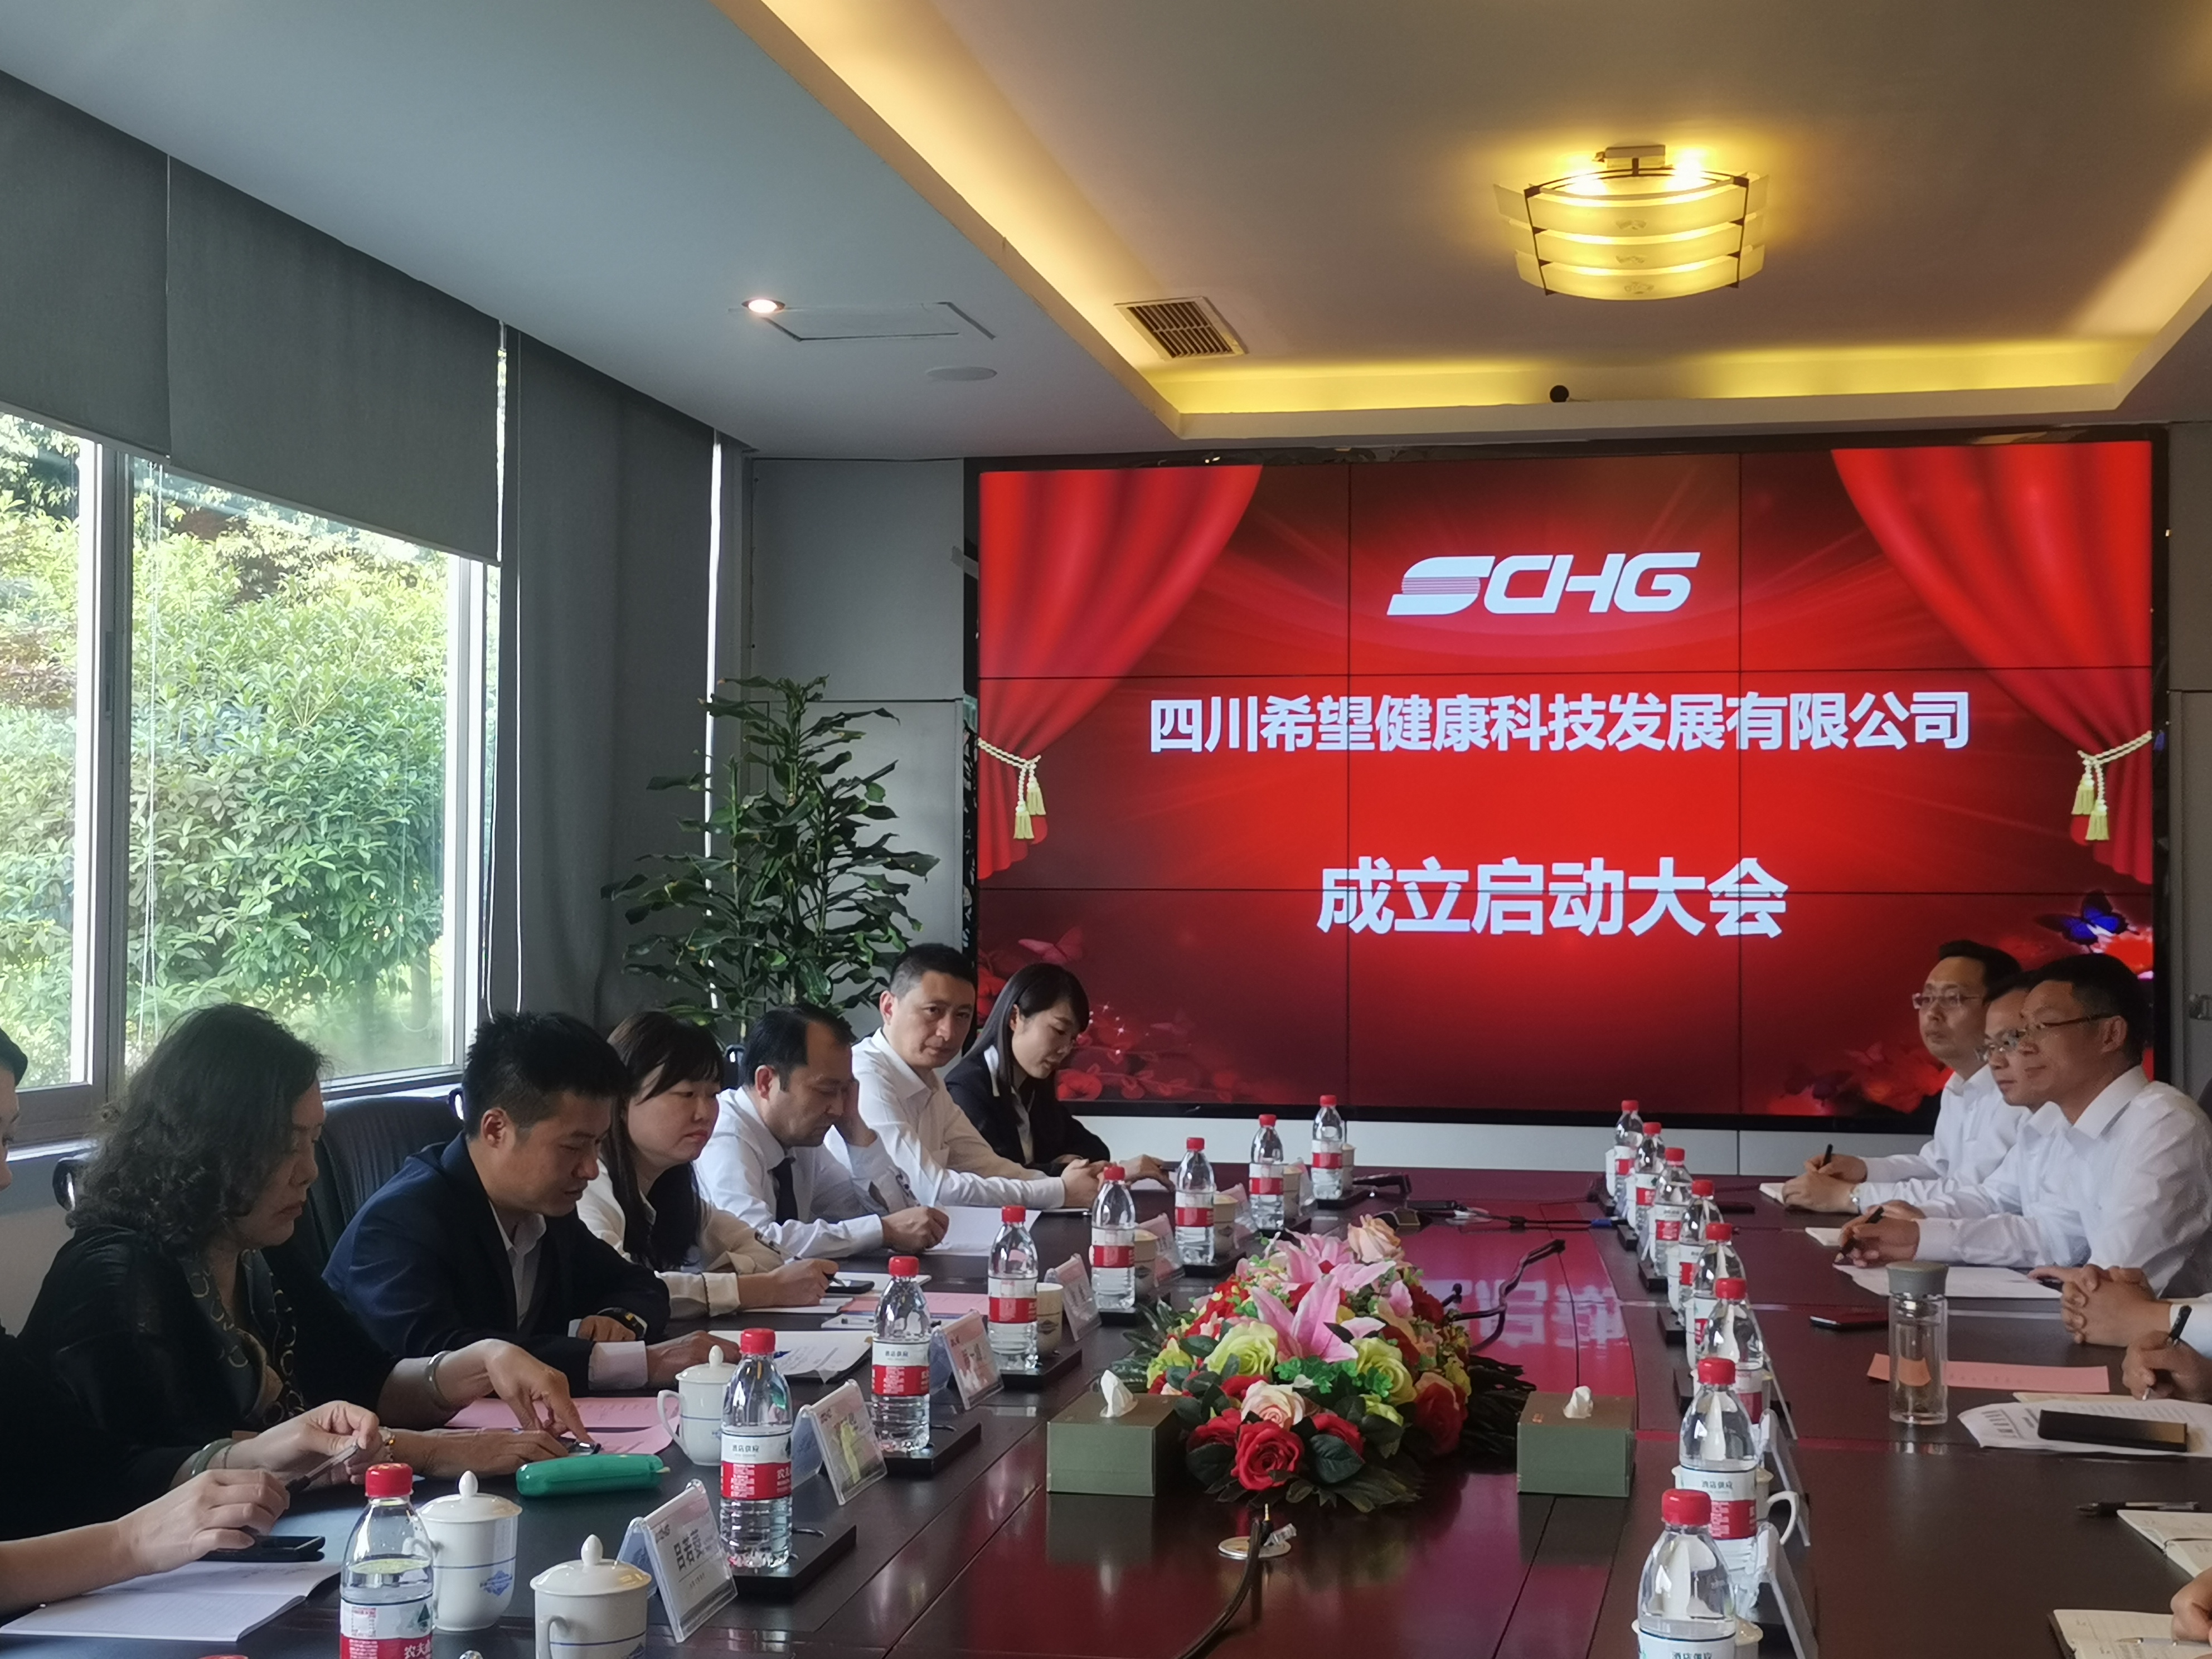 A new chapter in the health industry-Sichuan Hope Health Technology Development Corp., Ltd. was formally established